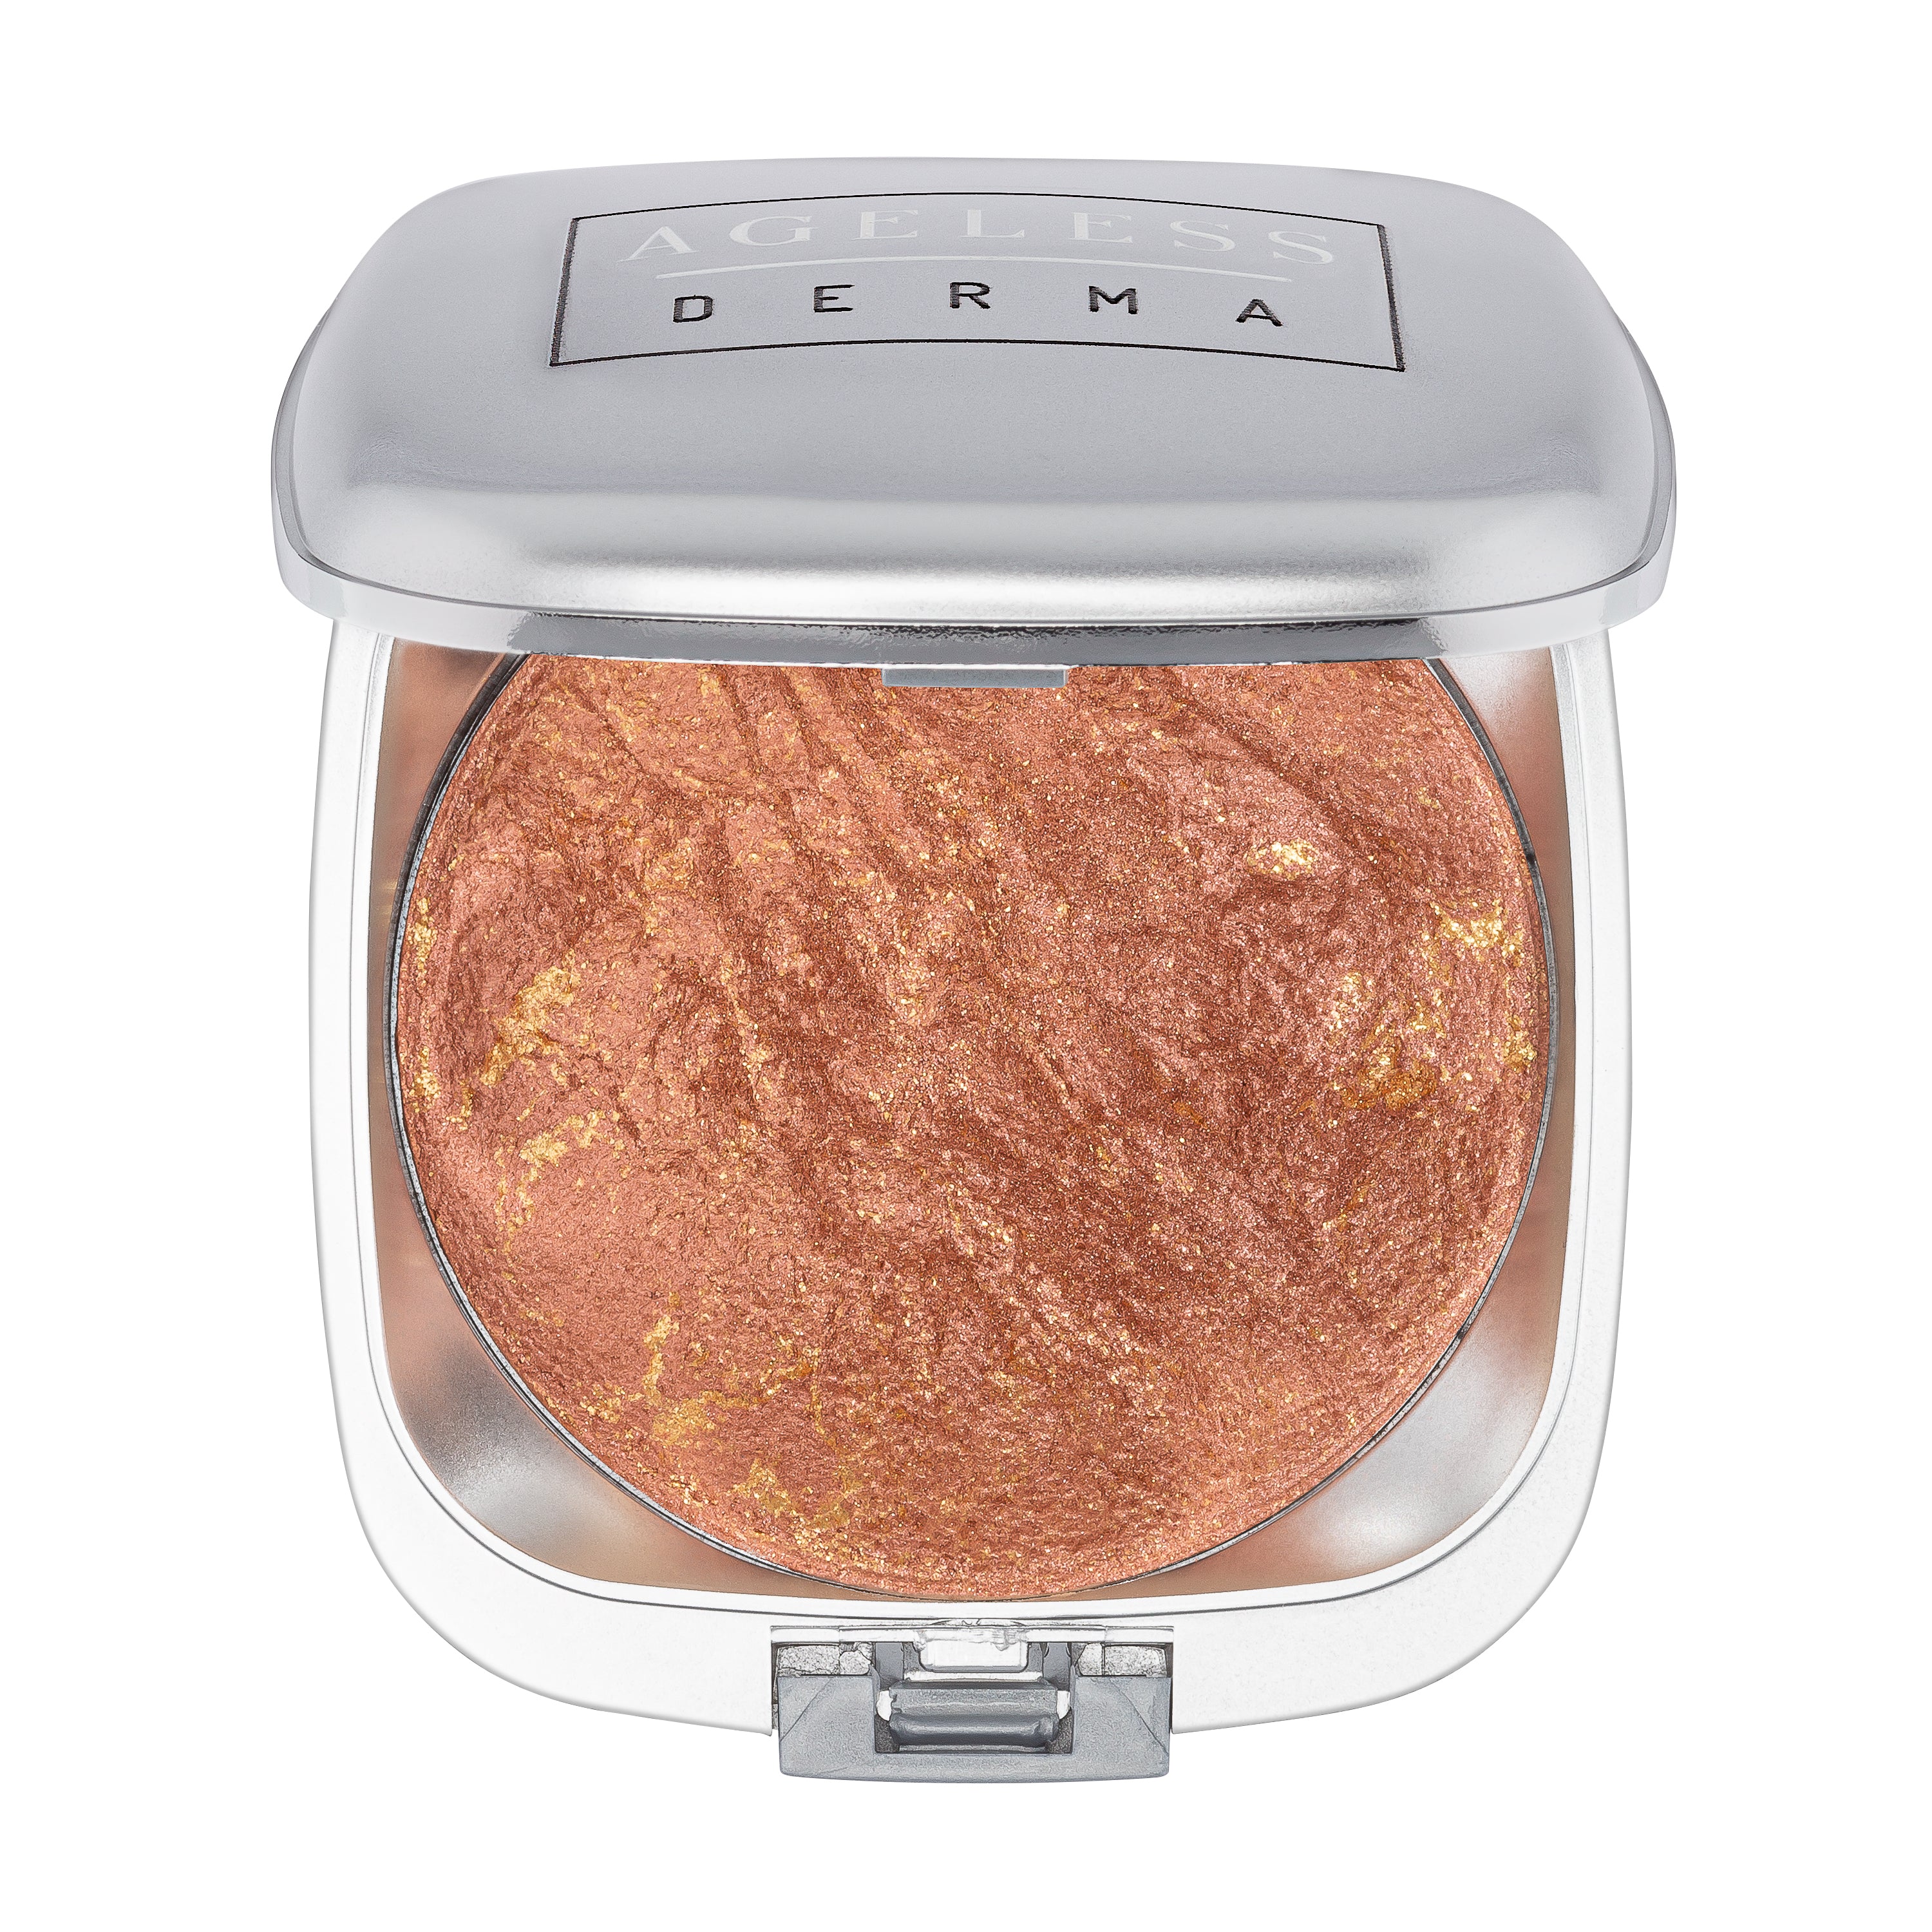 Ageless Derma Baked Mineral Foundation